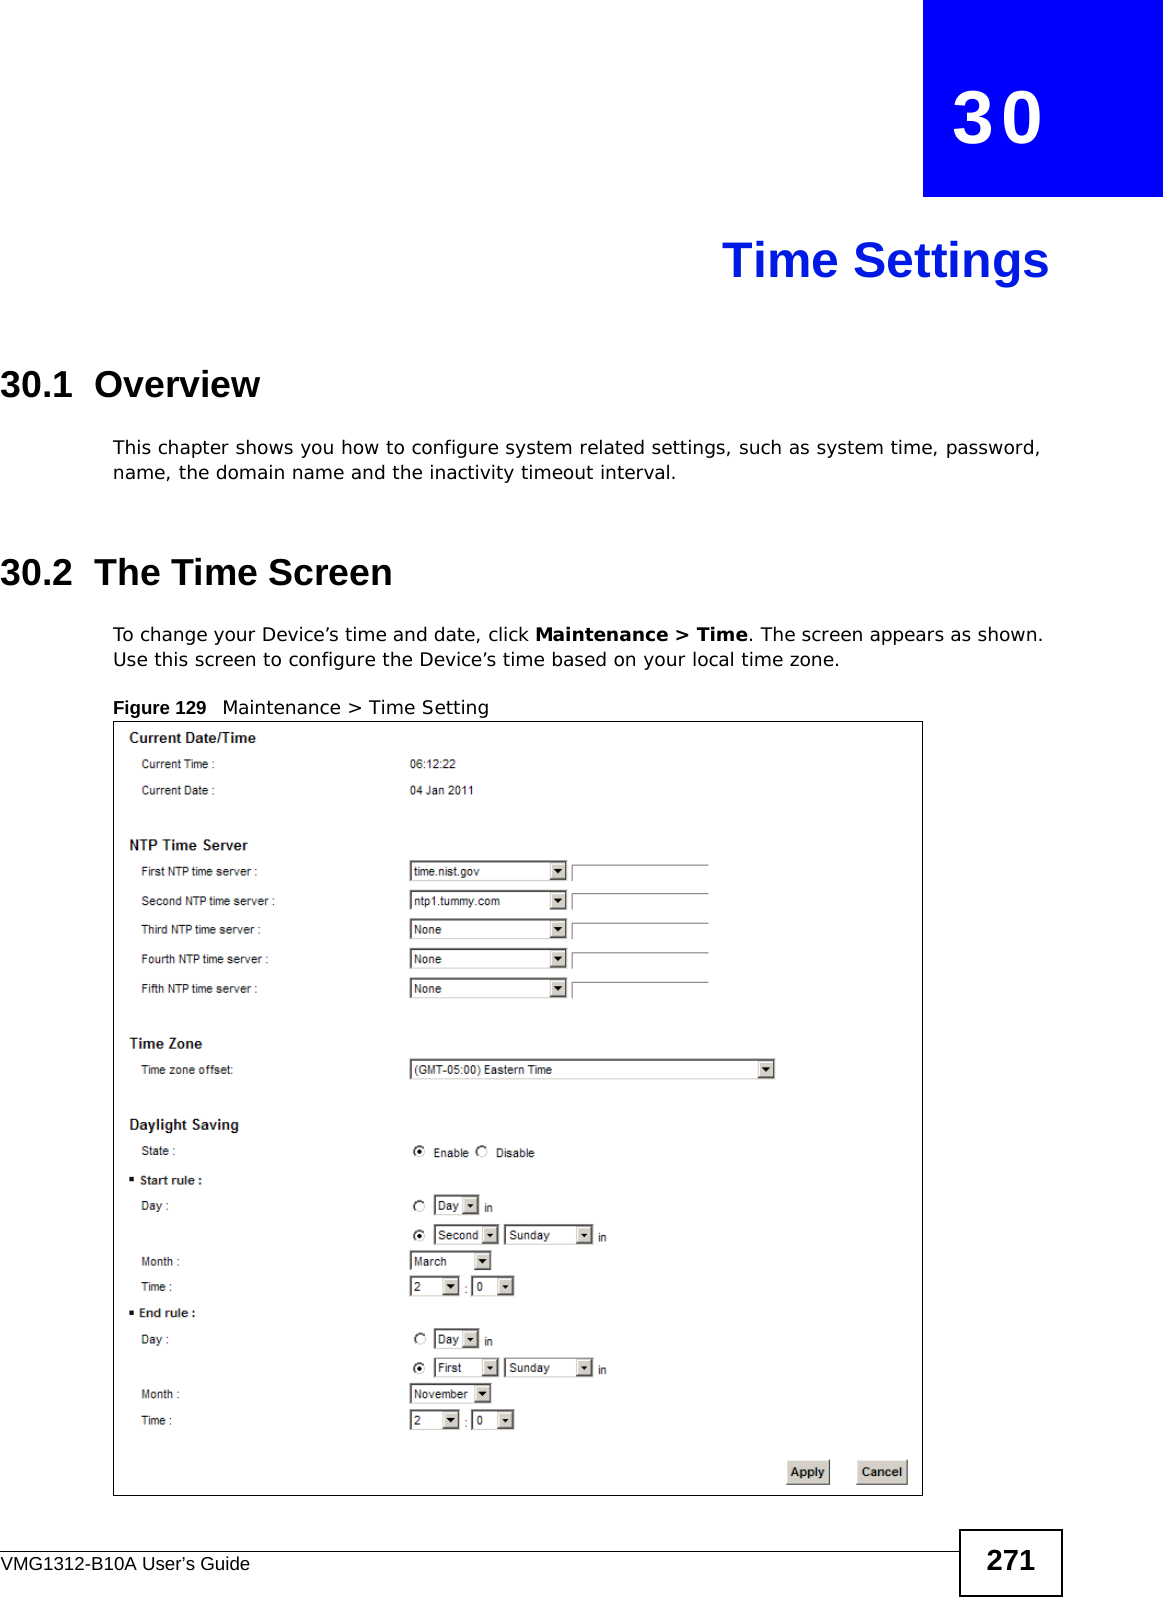 VMG1312-B10A User’s Guide 271CHAPTER   30Time Settings30.1  OverviewThis chapter shows you how to configure system related settings, such as system time, password, name, the domain name and the inactivity timeout interval.    30.2  The Time Screen To change your Device’s time and date, click Maintenance &gt; Time. The screen appears as shown. Use this screen to configure the Device’s time based on your local time zone.Figure 129   Maintenance &gt; Time Setting